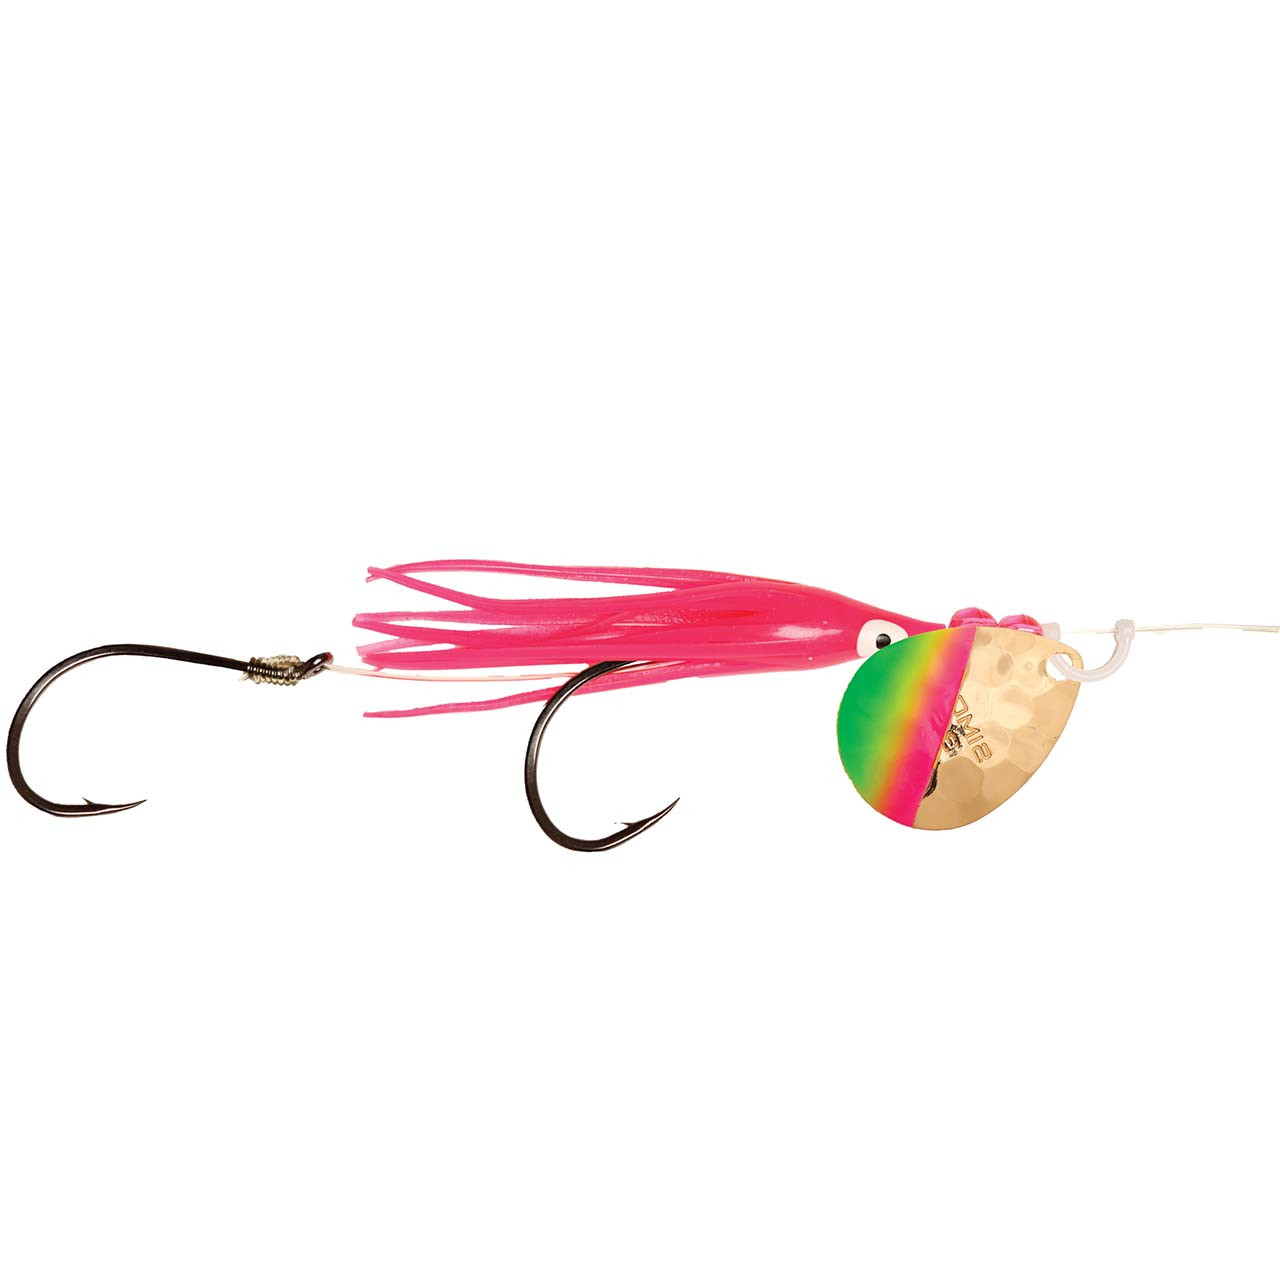 Simon Mono Hoochie Spinner Trolling Lure - Red/Gold/YellowithGreen 3/0 by Sportsman's Warehouse